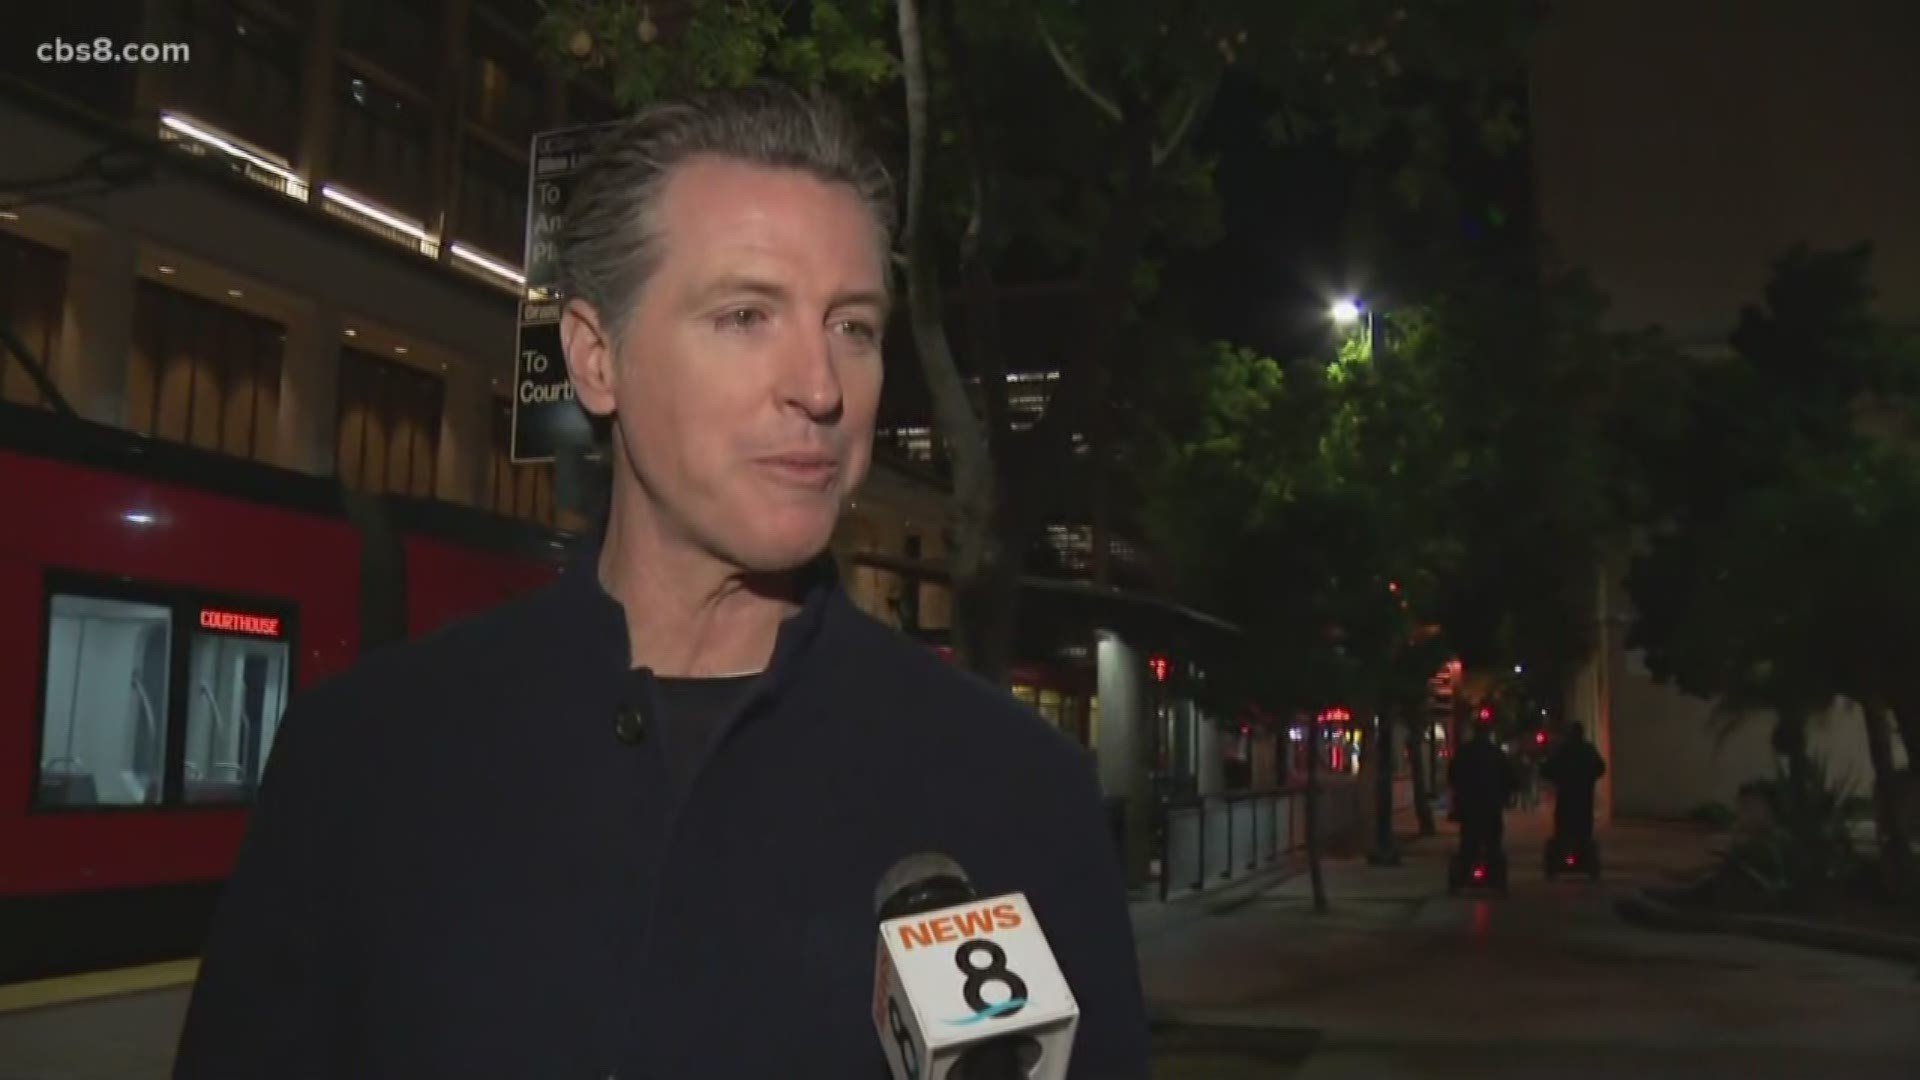 Since last week, Newsom has traveled to several areas across California as part of a statewide "homelessness tour."